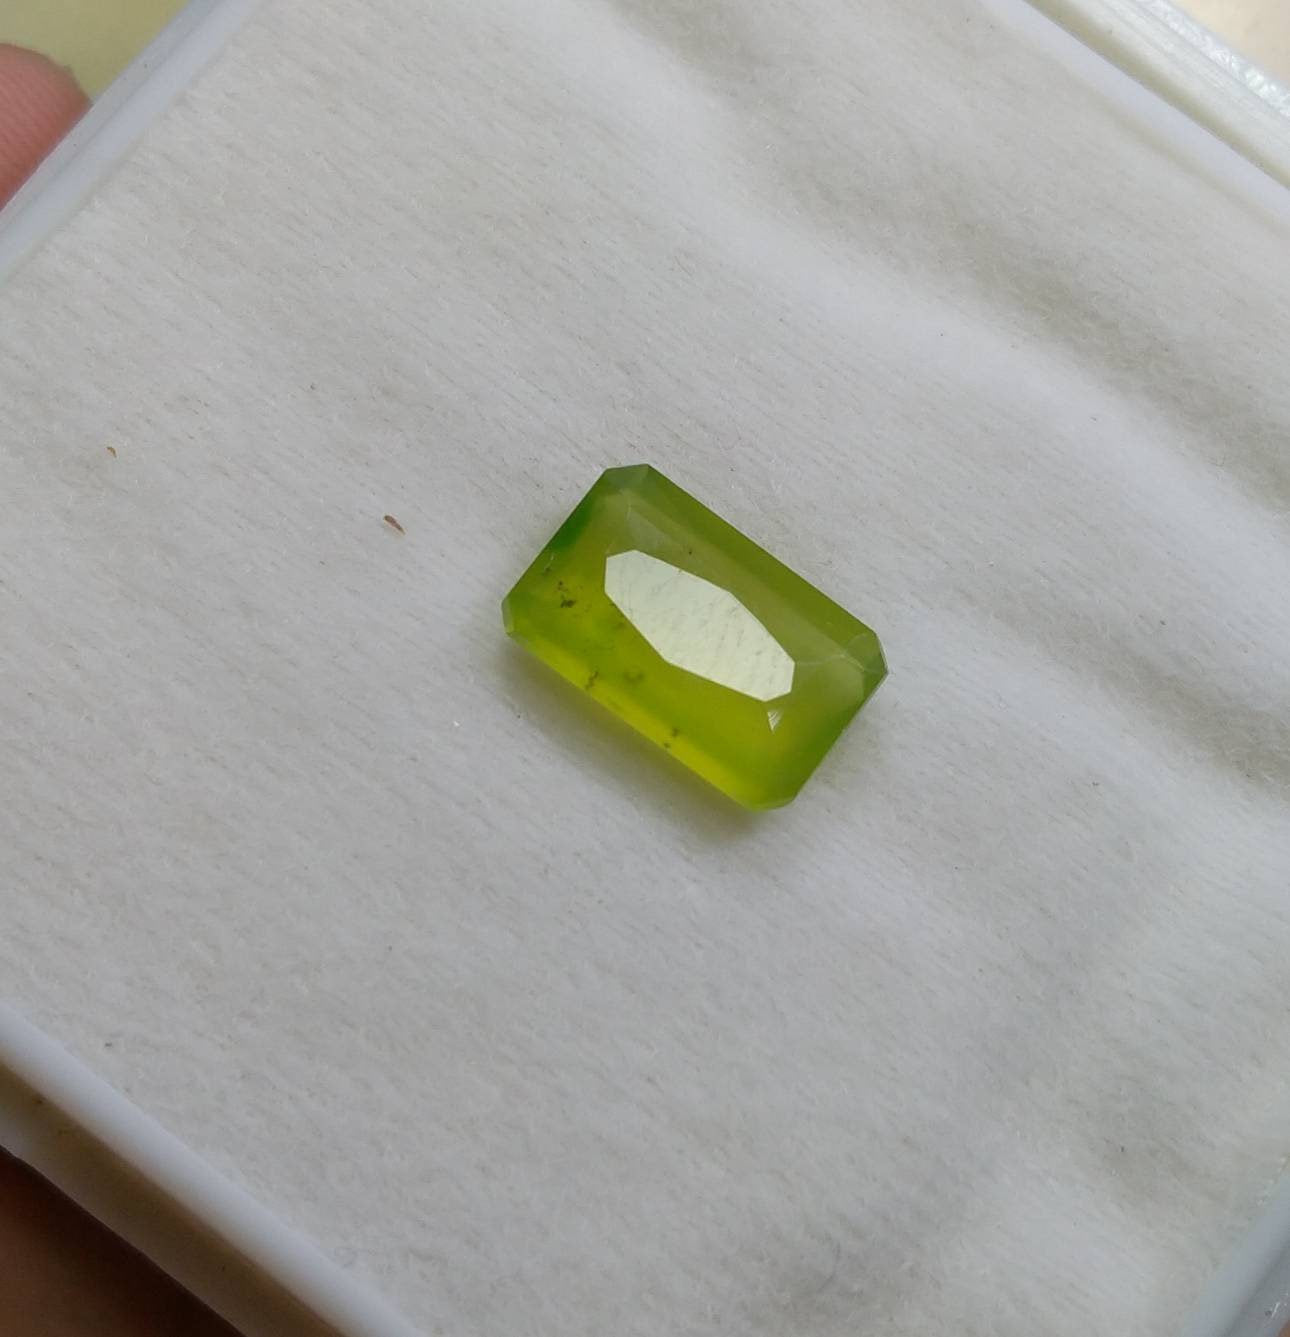 ARSAA GEMS AND MINERALSNatural top quality beautiful 5 carat radiant shape Faceted green hydrograssular garnet gem - Premium  from ARSAA GEMS AND MINERALS - Just $12.00! Shop now at ARSAA GEMS AND MINERALS